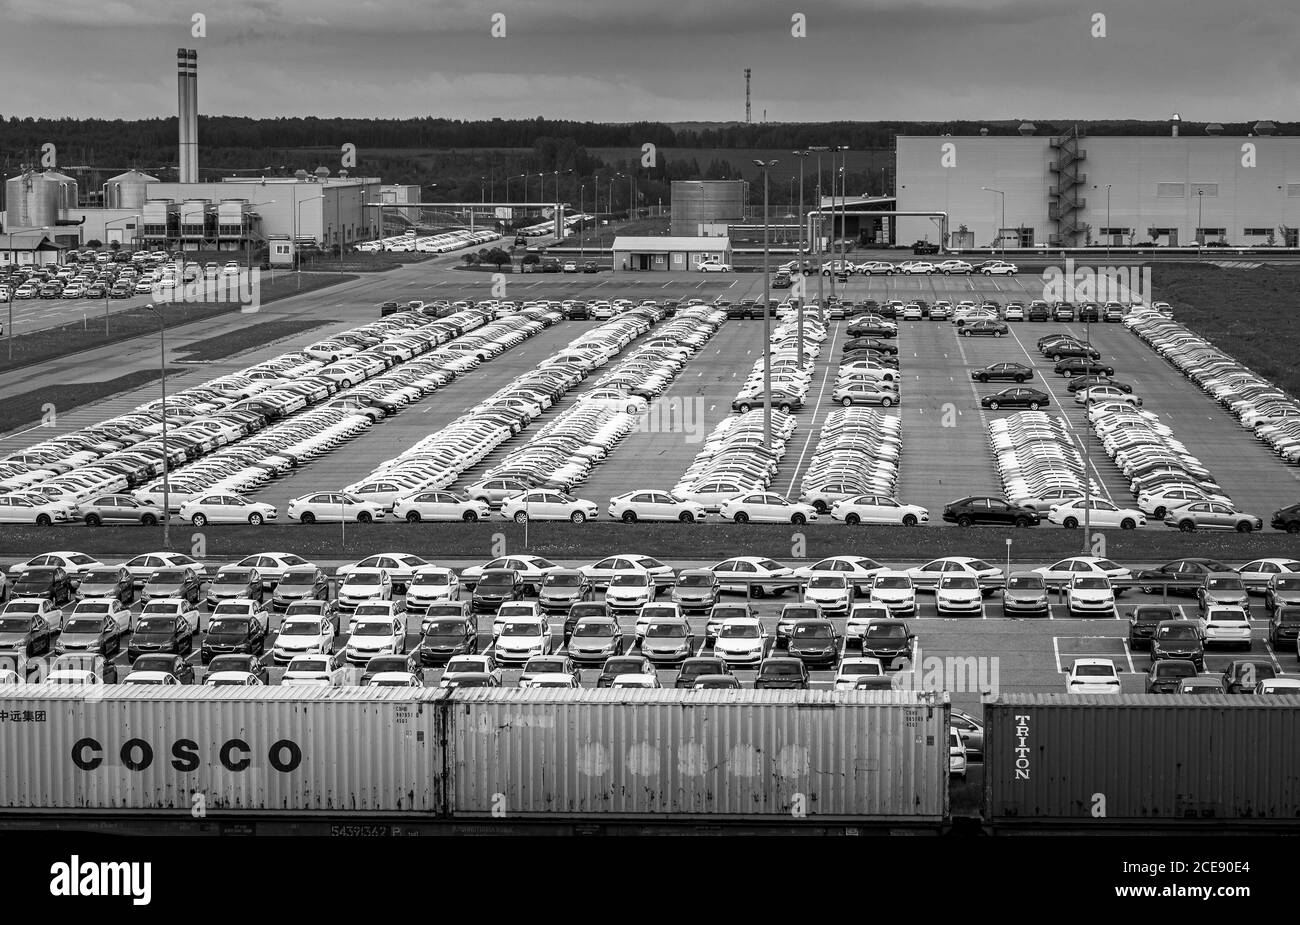 Volkswagen Group Rus, Russia, Kaluga - MAY 24, 2020: Rows of a new cars parked in a distribution center with train on a foreground and car factory on Stock Photo